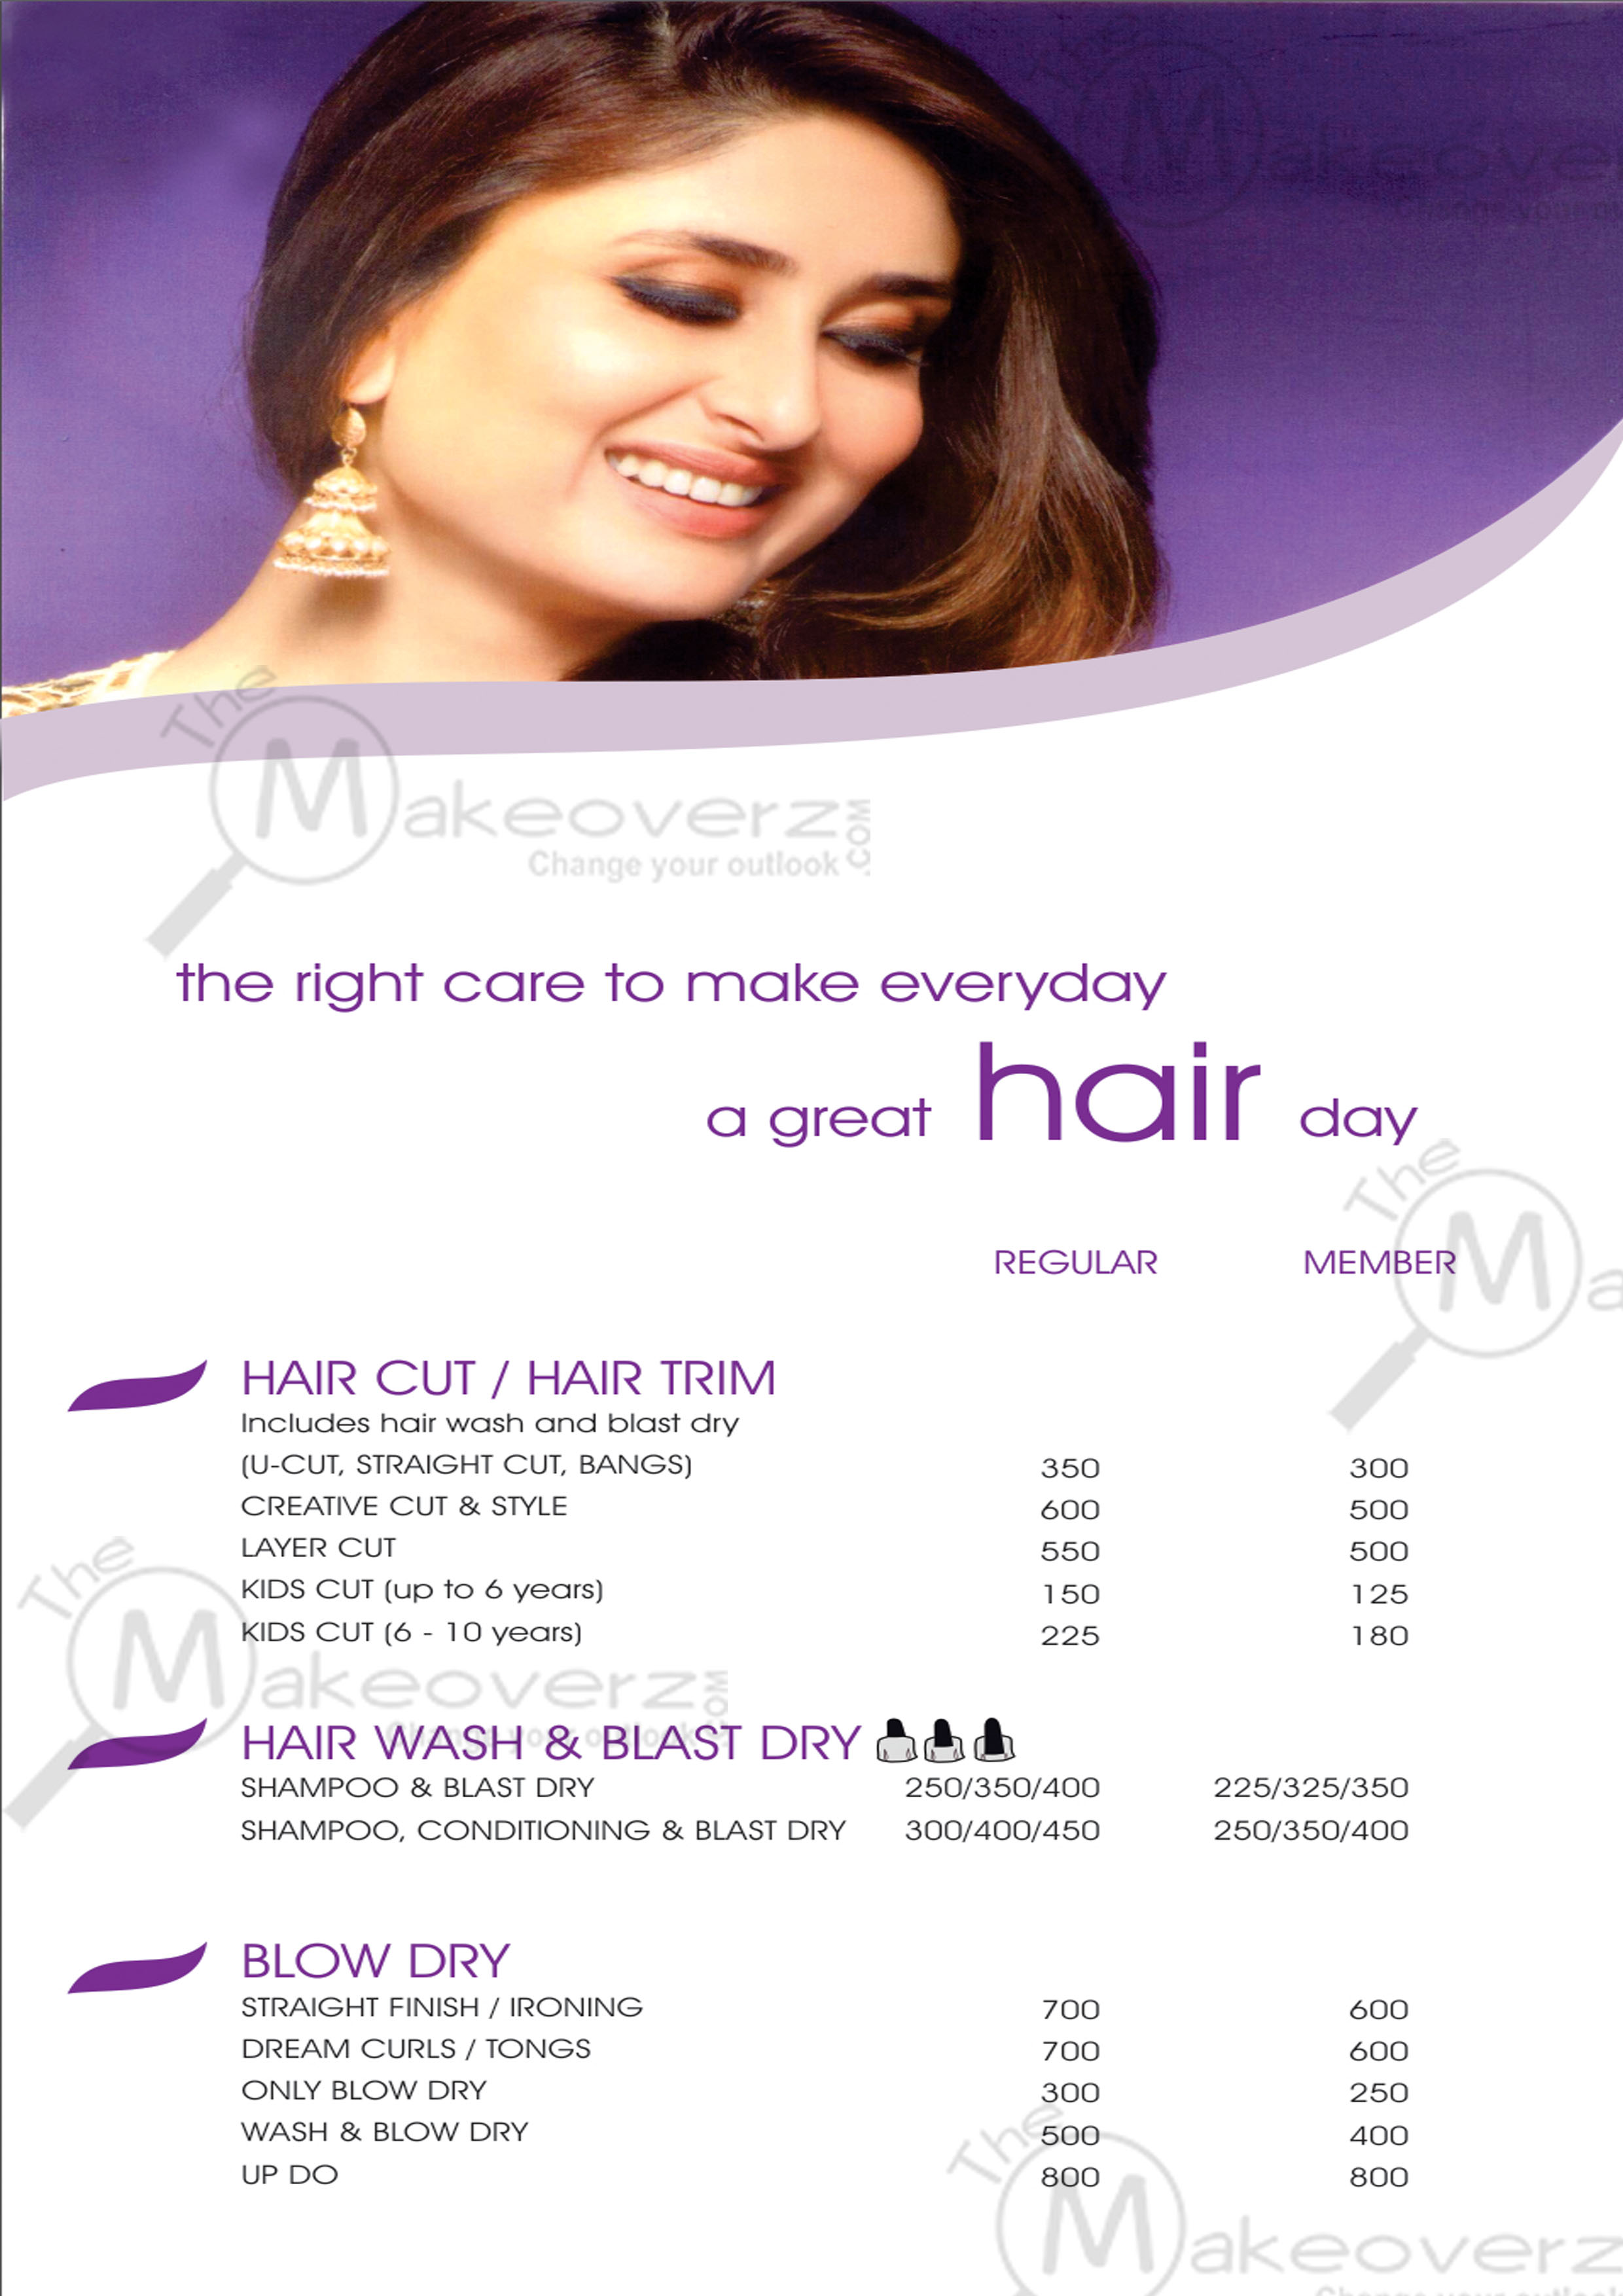 Hair Smoothening Cost In Naturals Salon Sale, 55% OFF |  